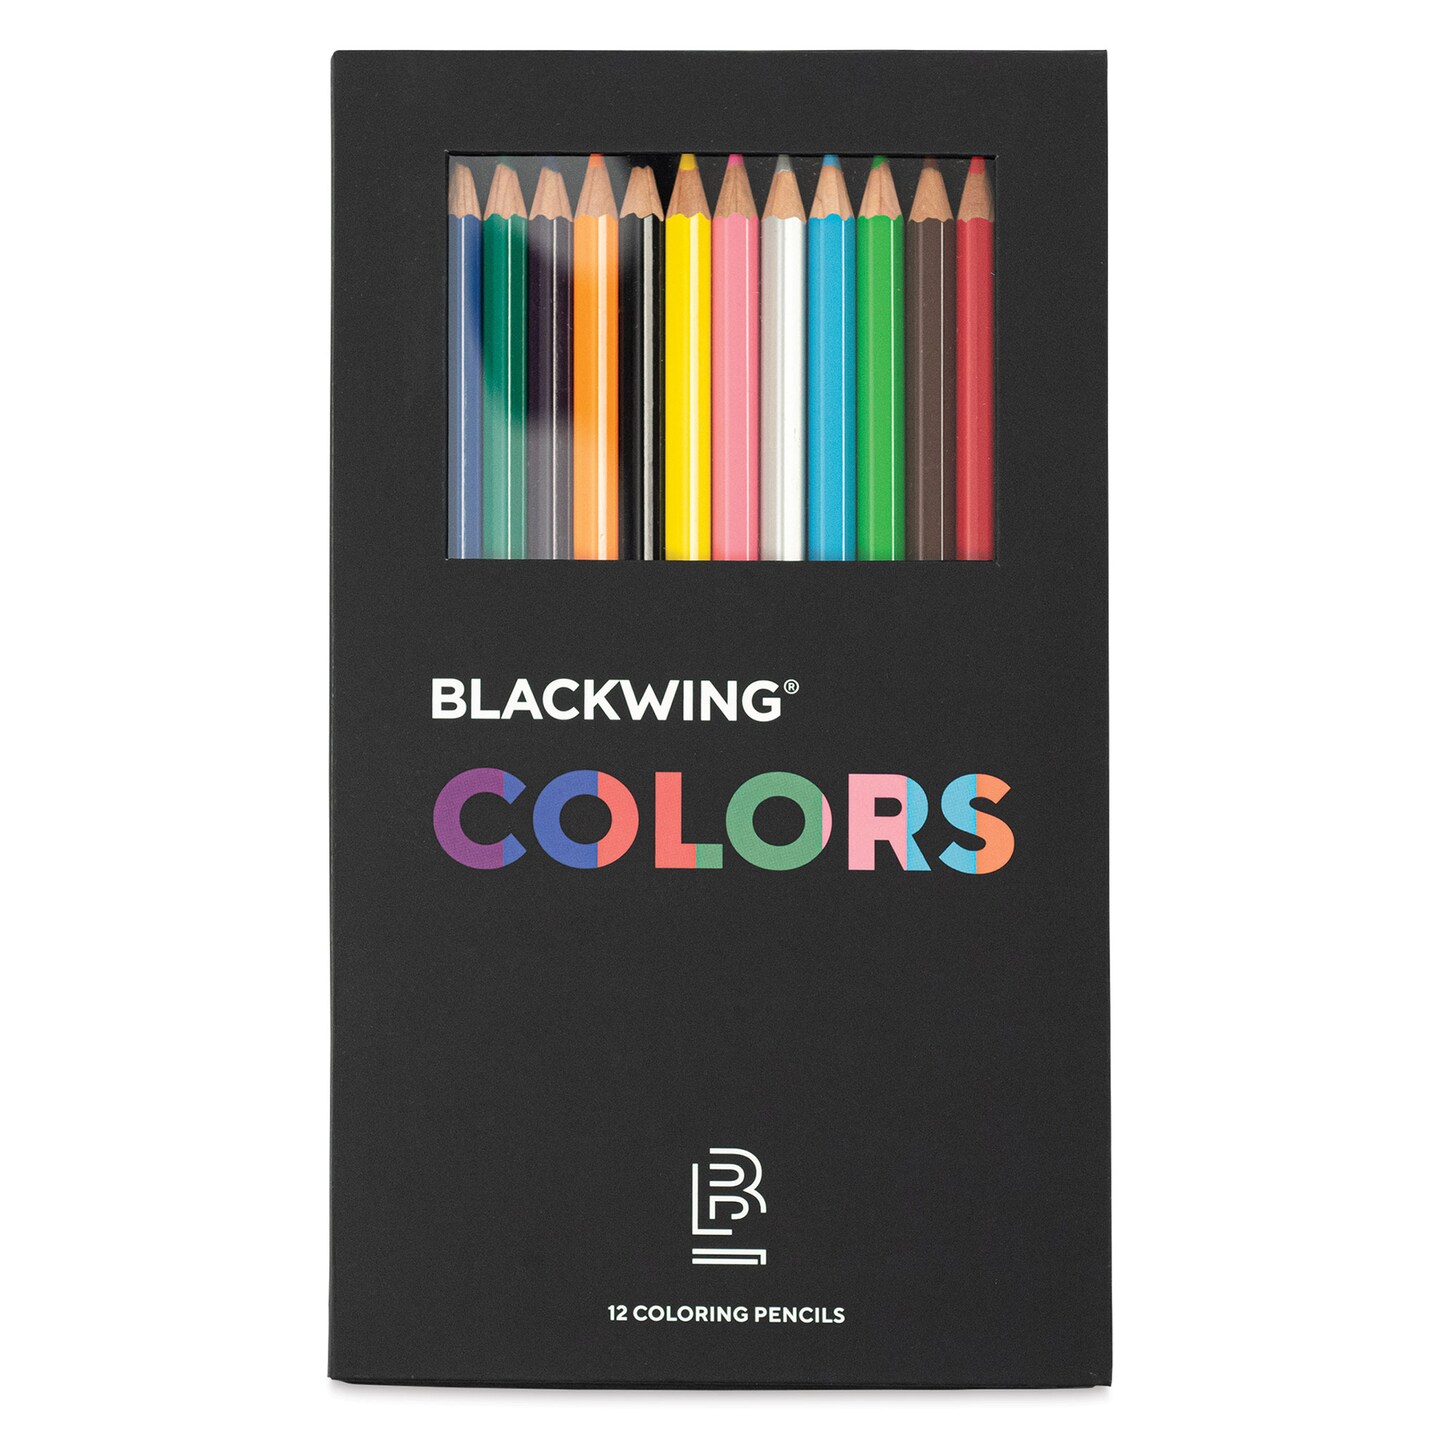 Blackwing Colors Coloring Pencils - Set of 12